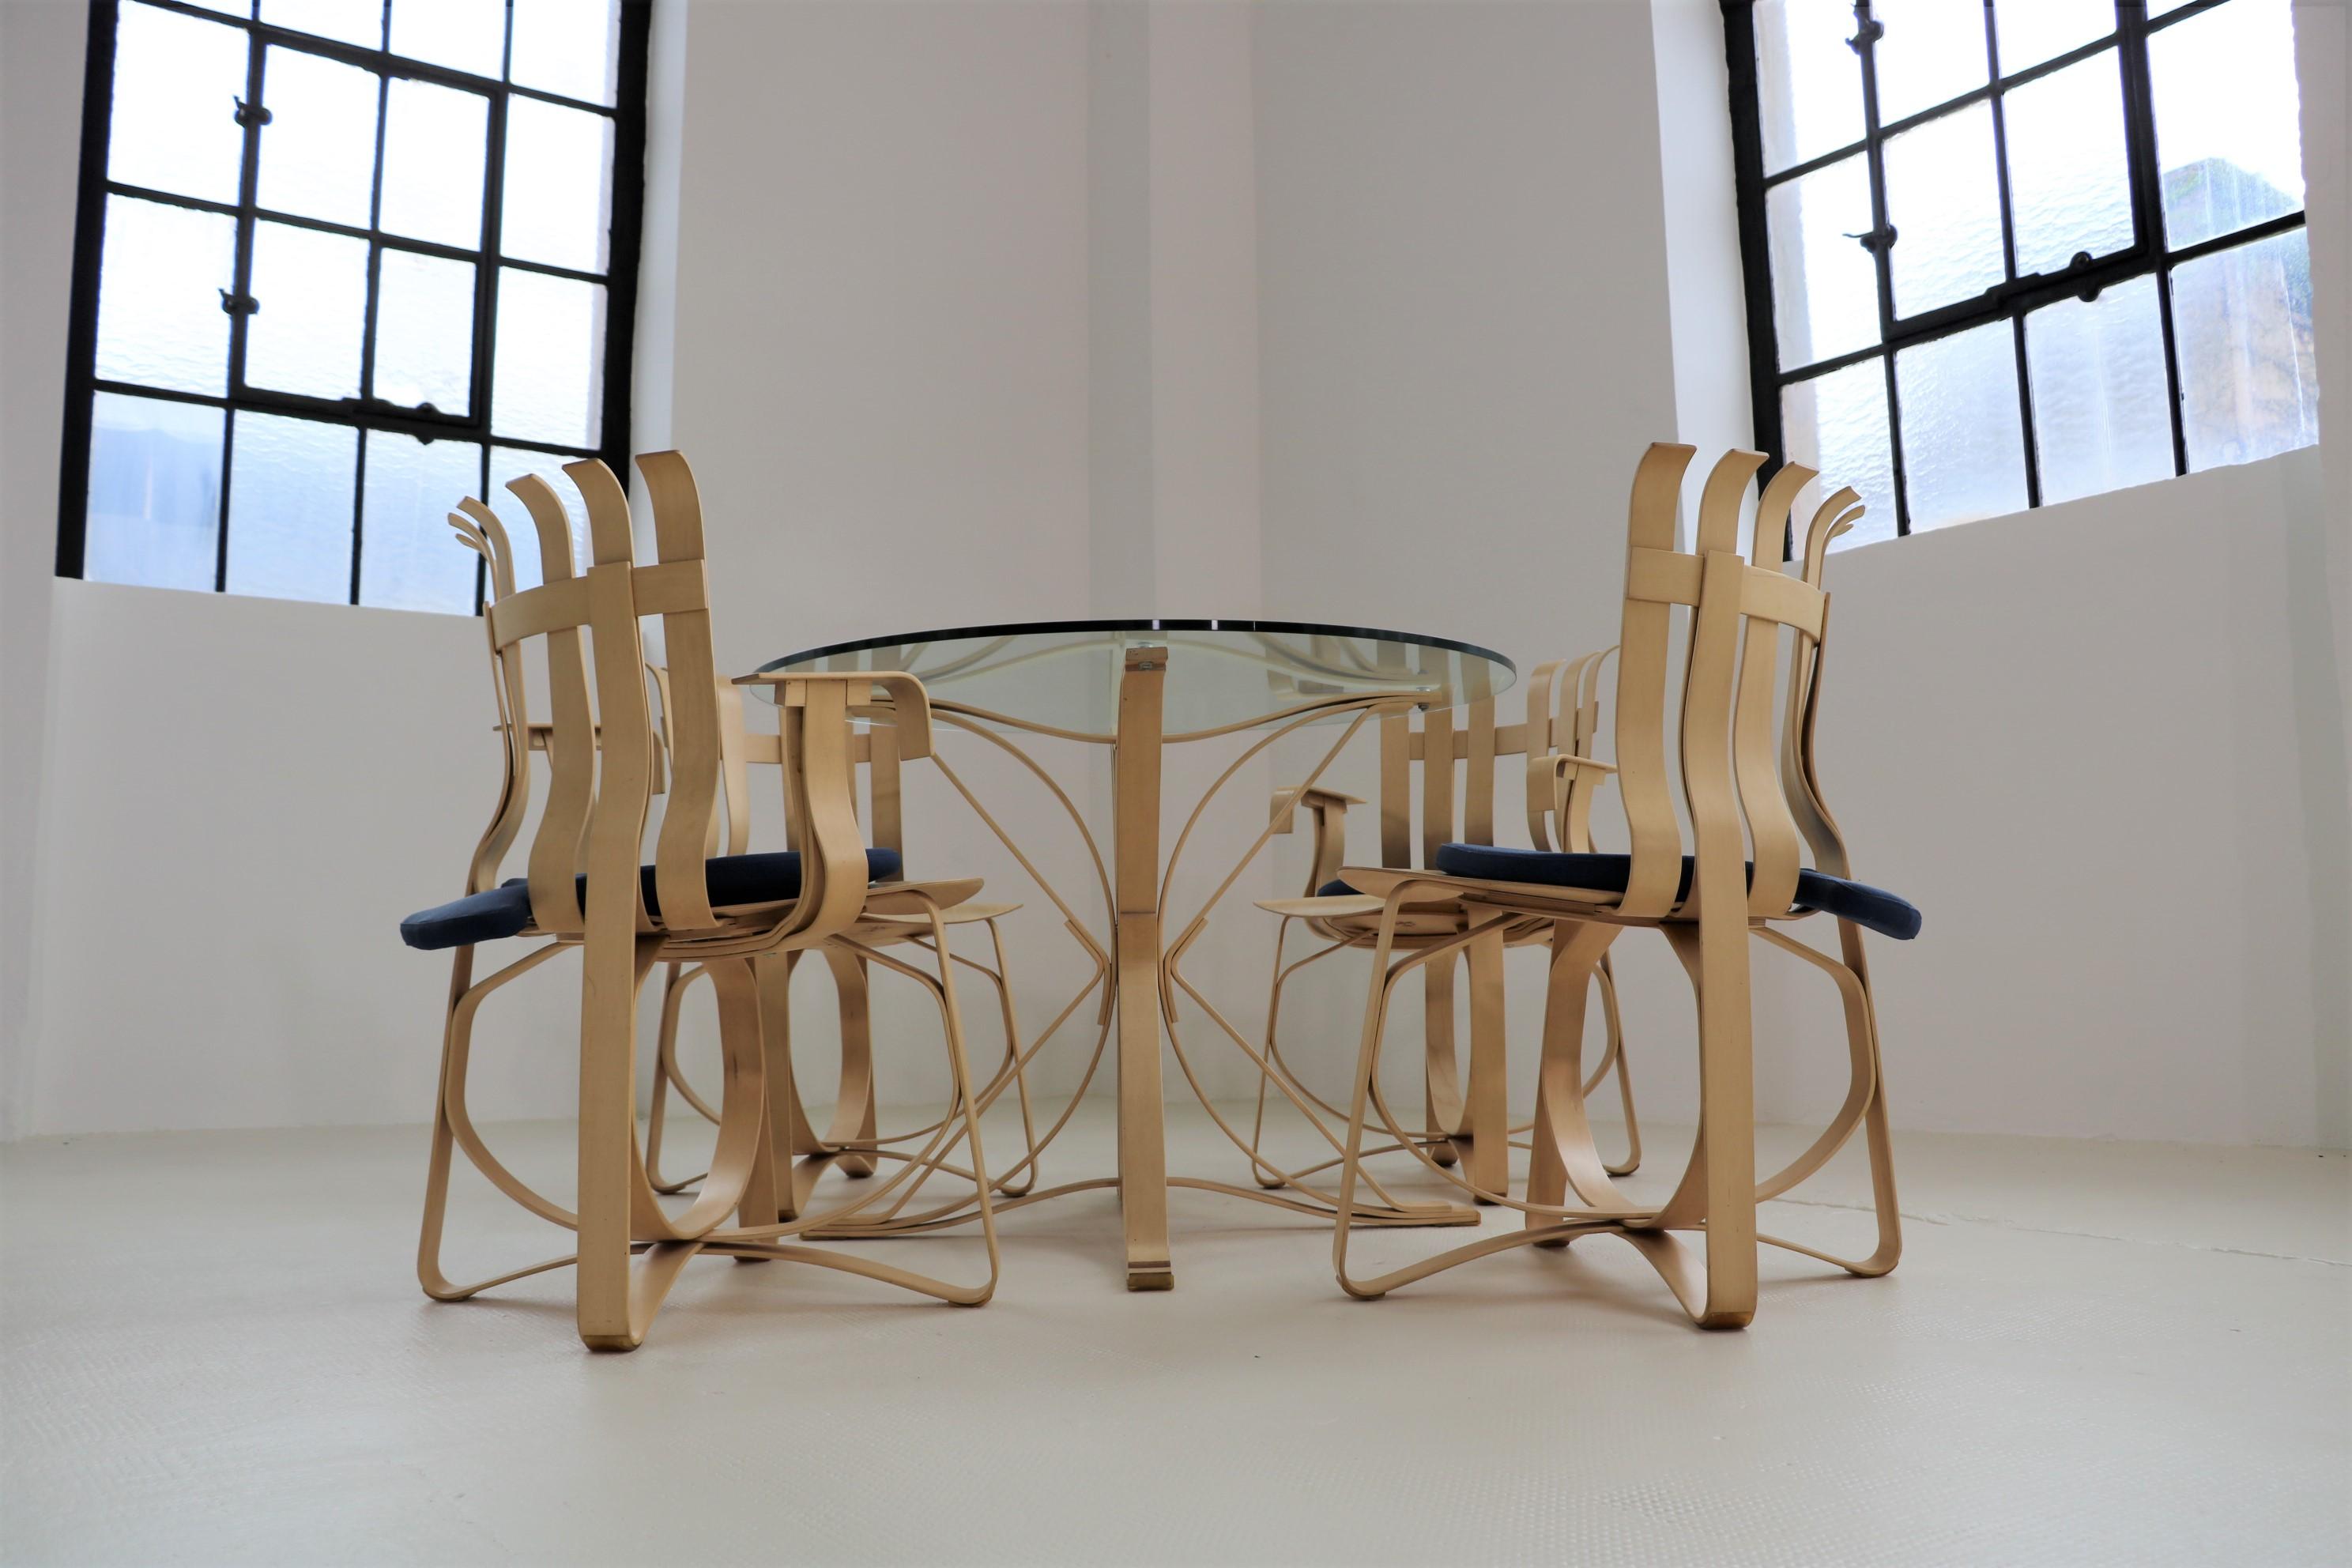 Dining set by Frank Gehry for Knoll International, produced in 1993.
Very nice original condition with matching, original seat pads from Knoll International.
Made from laminated maple wood that is bent, woven and curved into a functional sculpture.